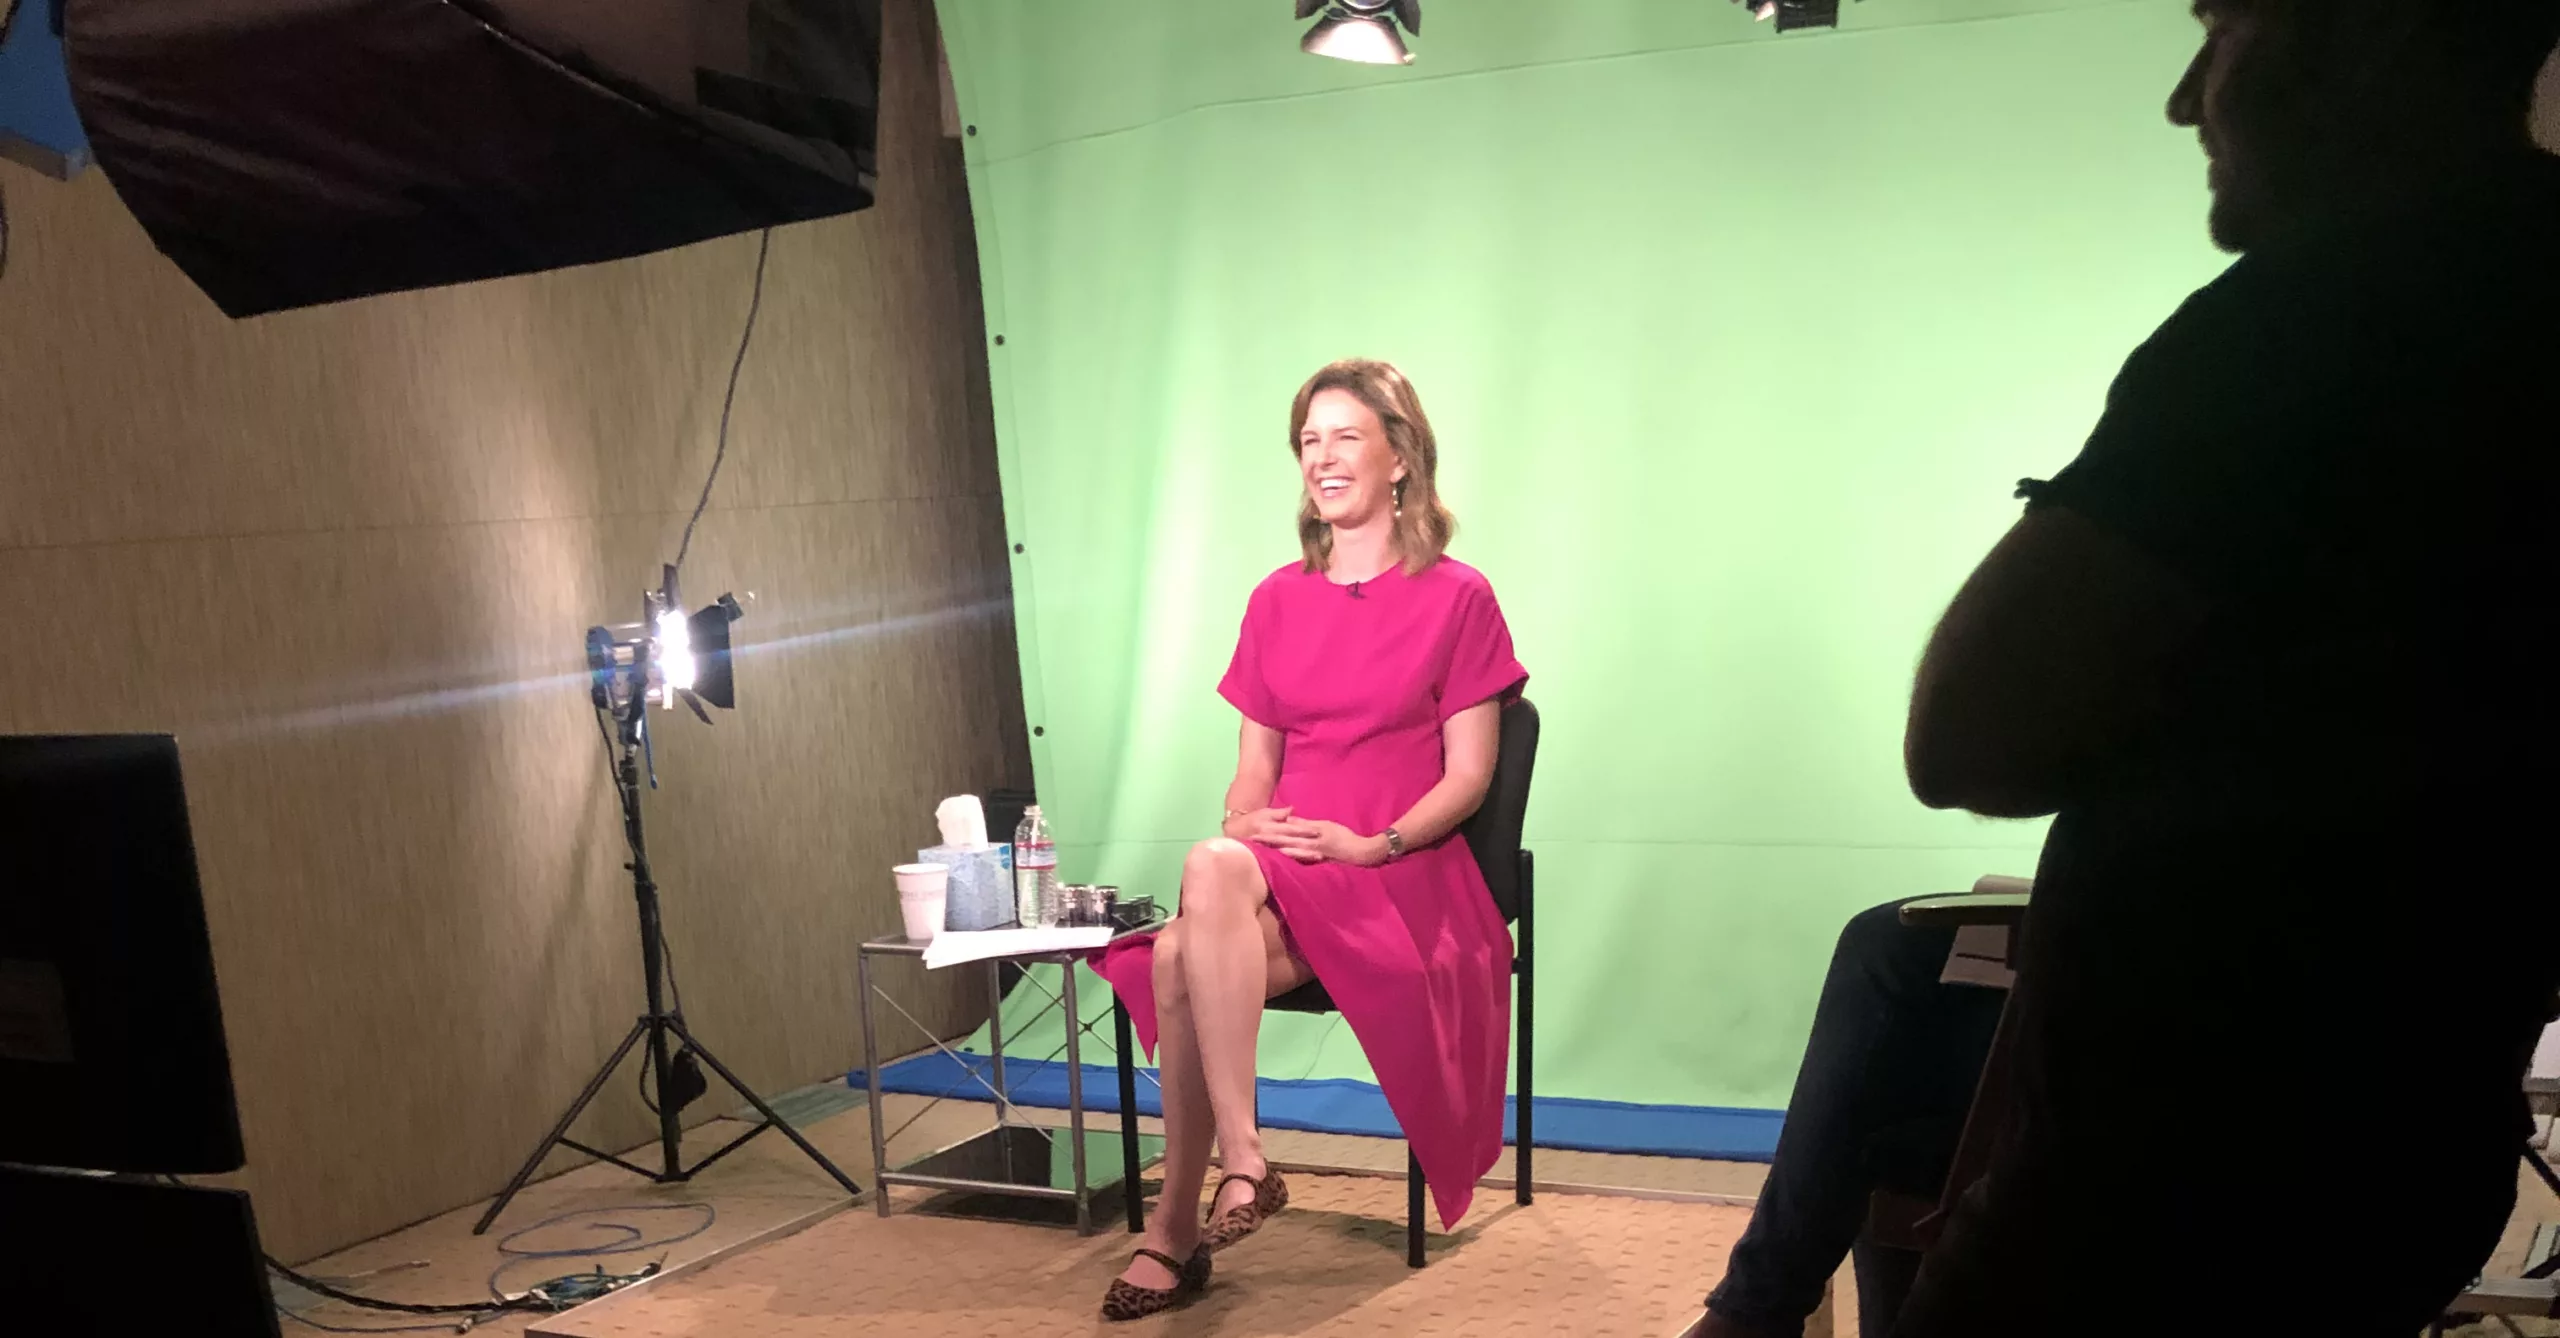 Woman in pink dress sitting for video shoot with green screen background and studio lights.